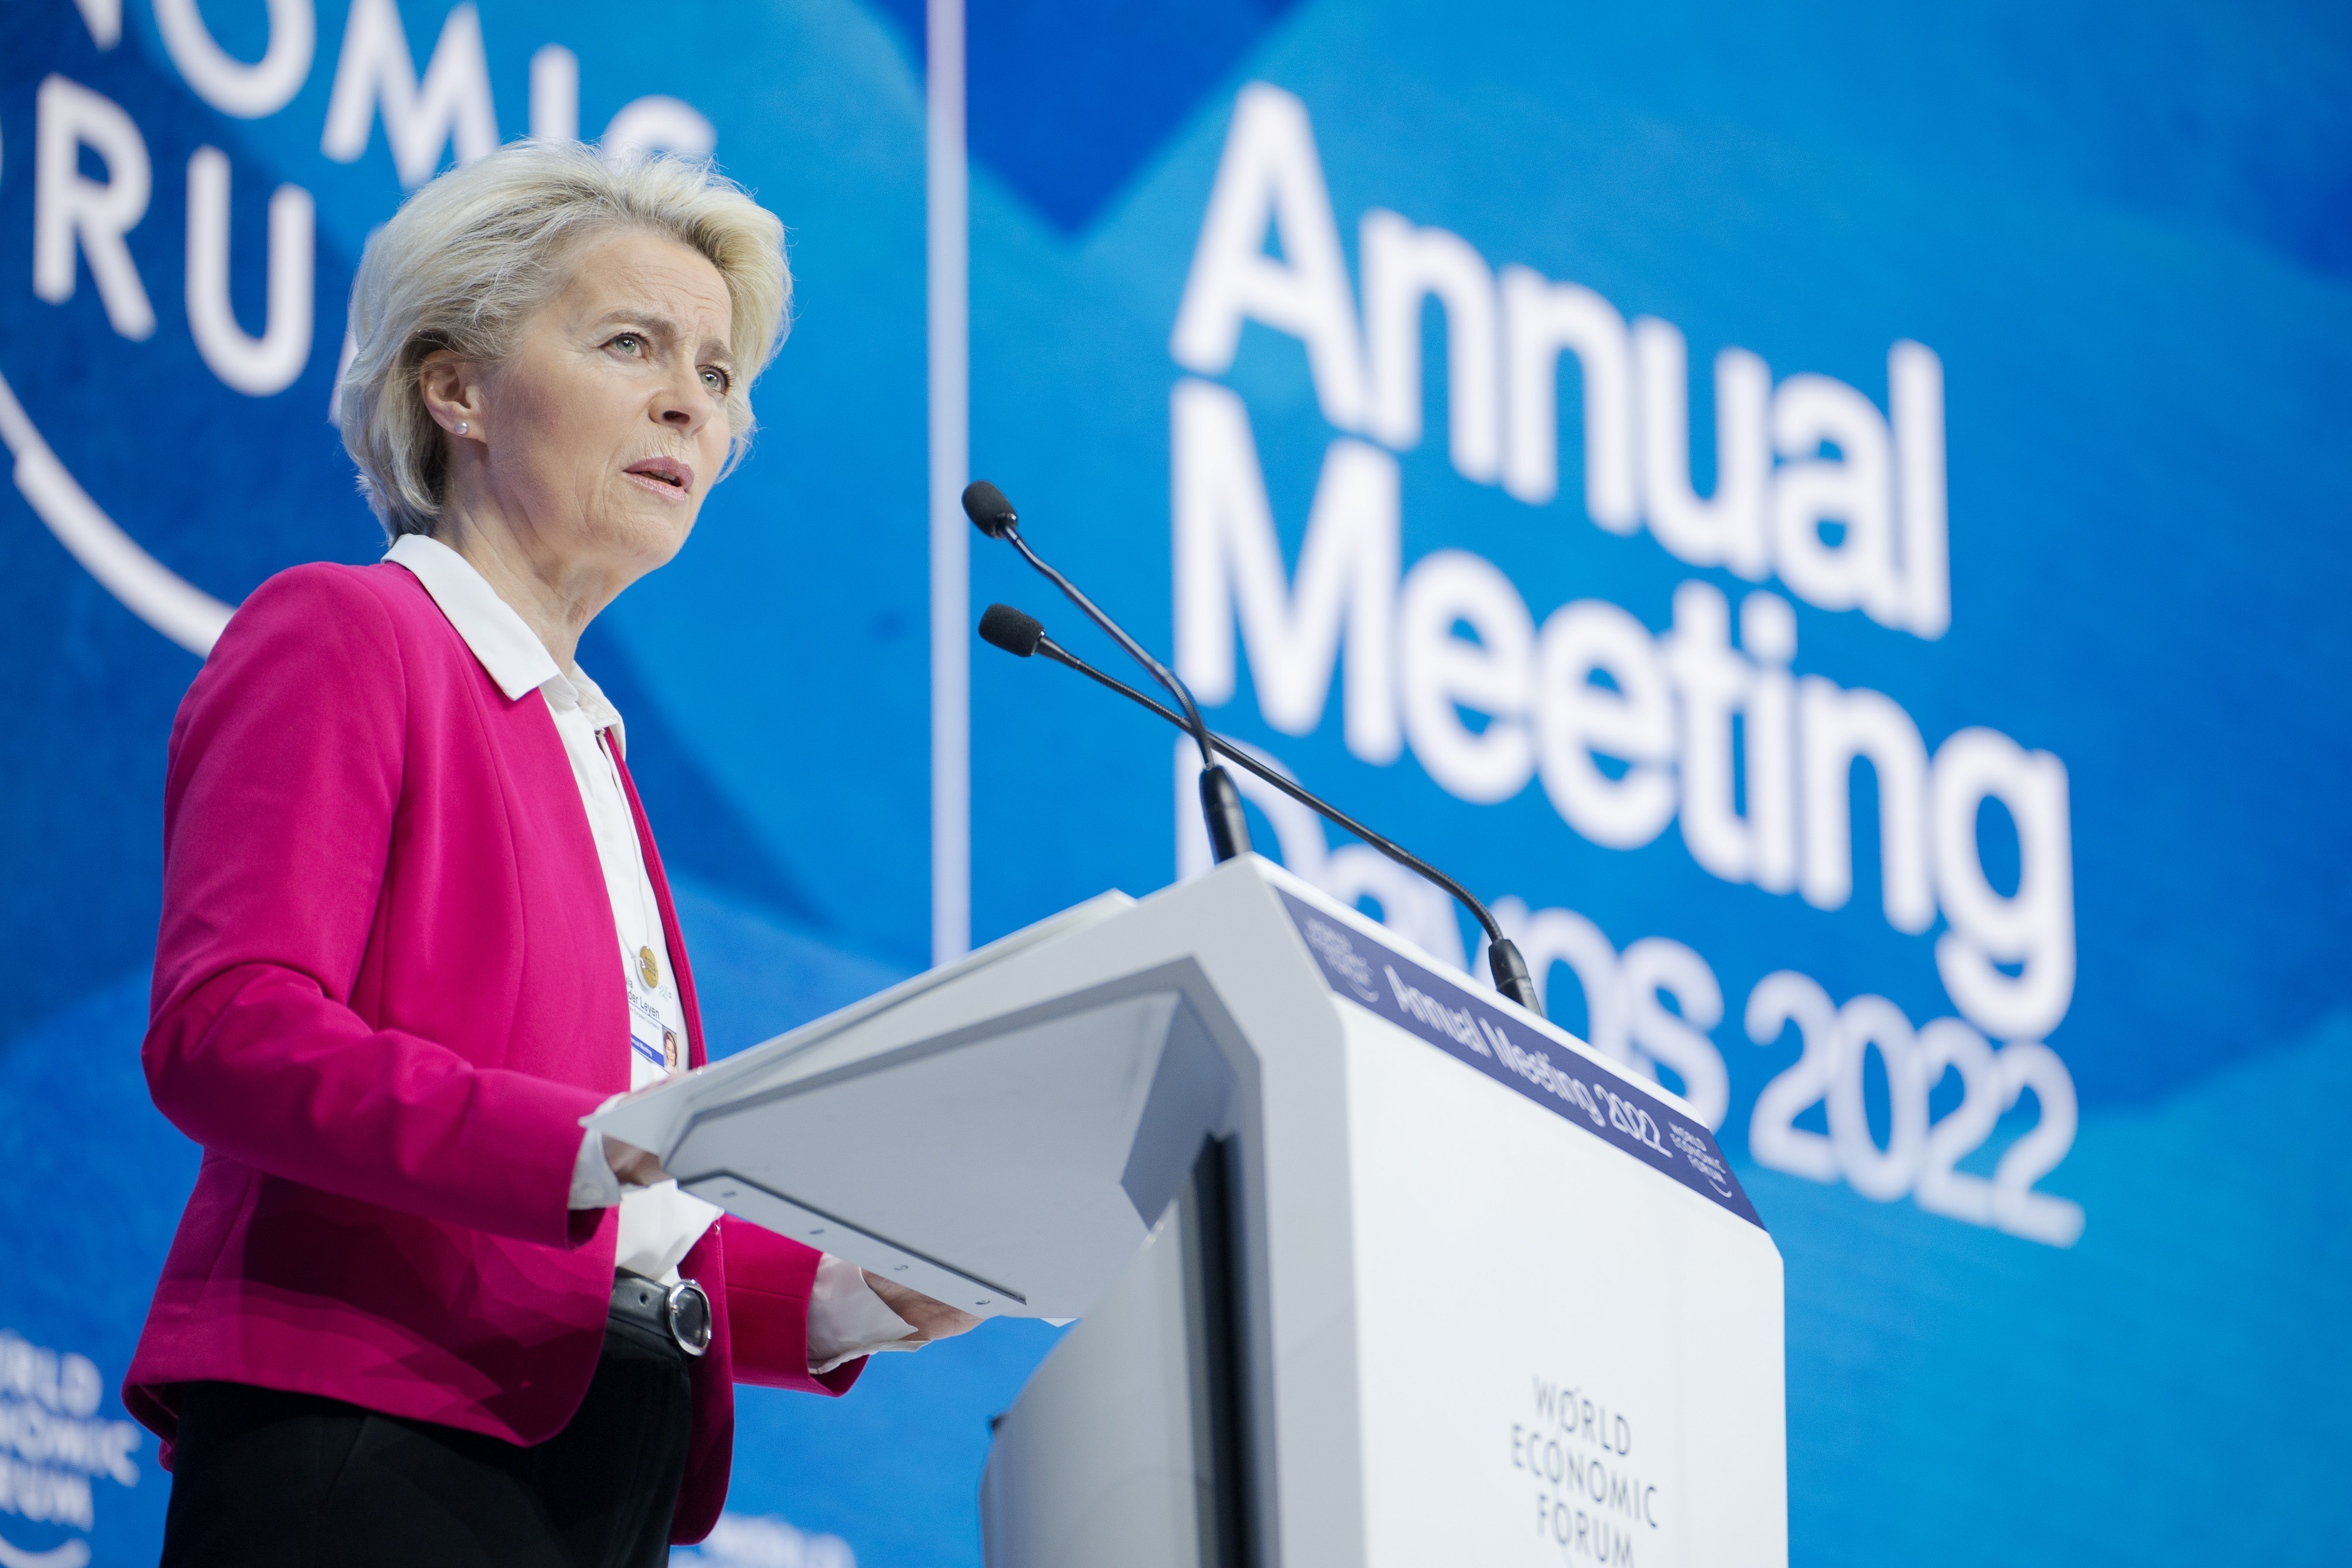 President of the European Commission Ursula von der Leyen delivers an address at the WEF Annual Meeting. Photo: WEF/dpa